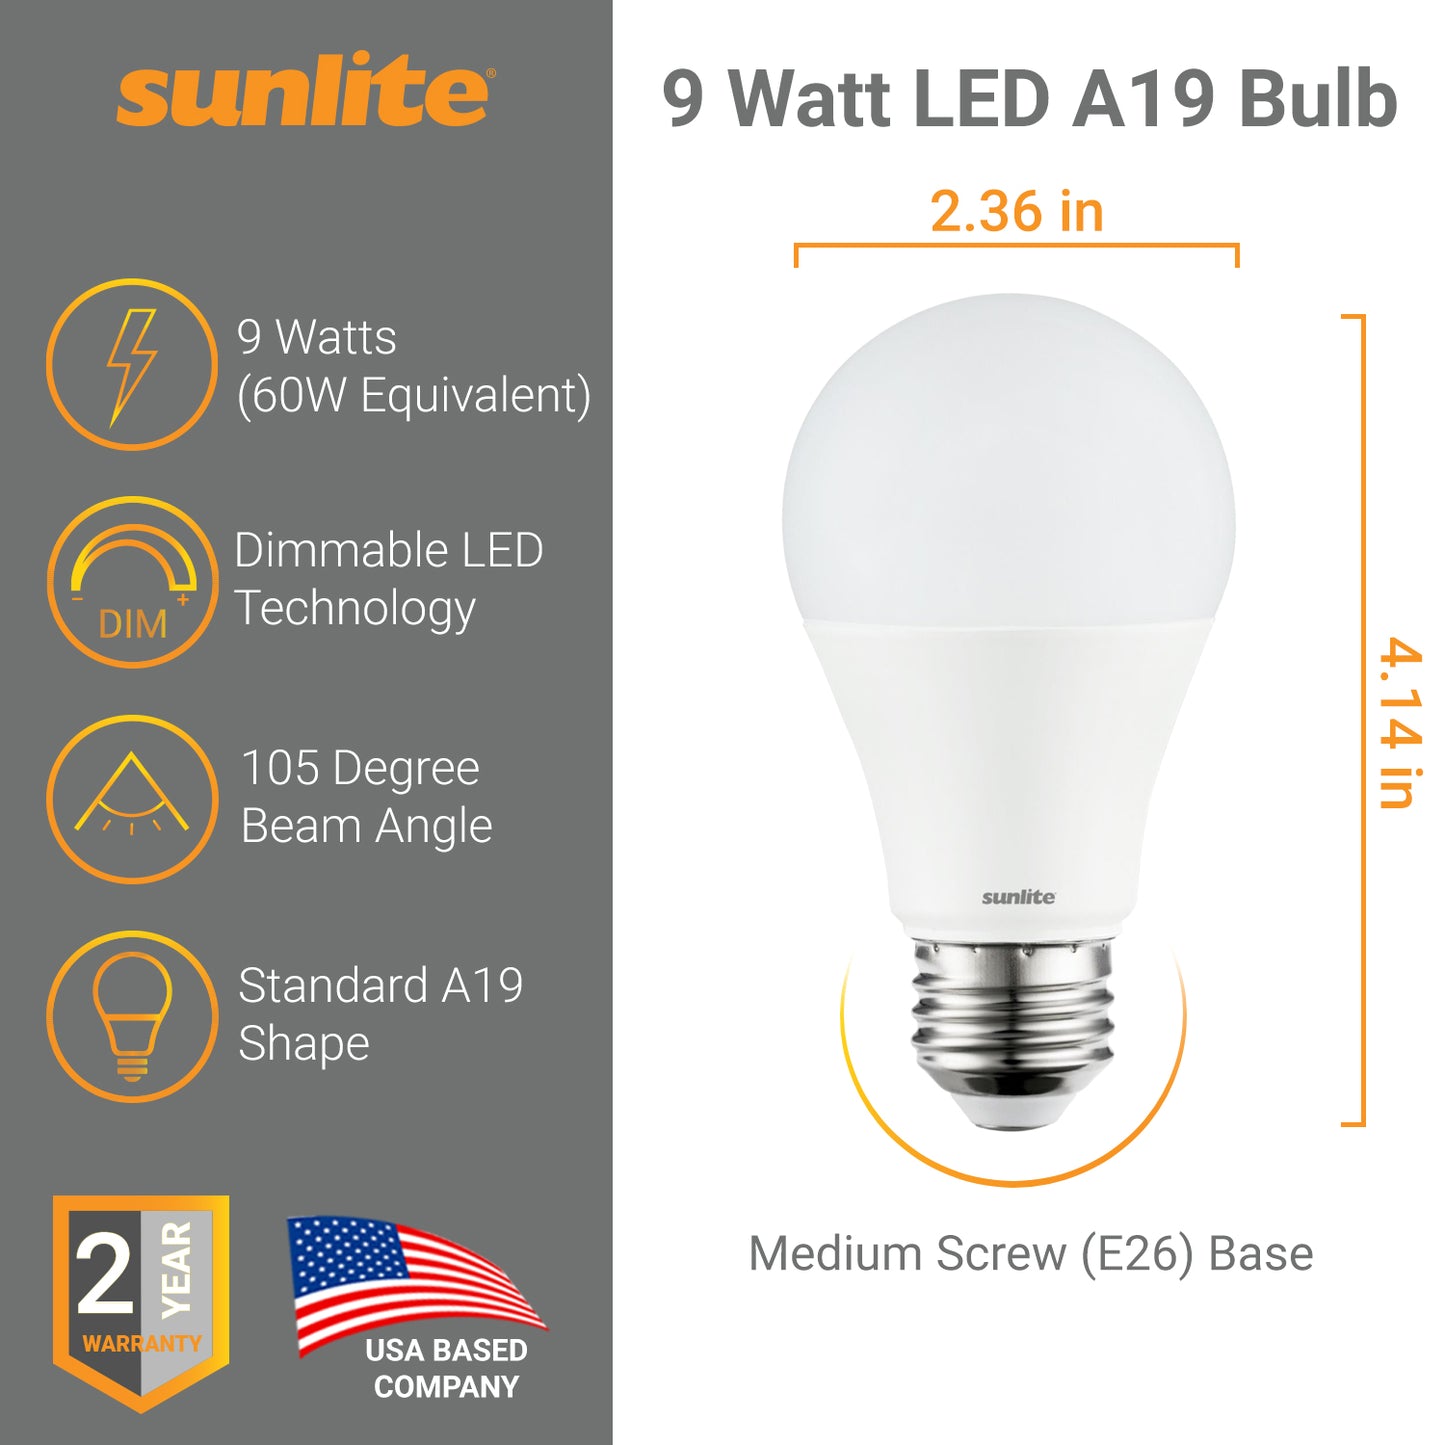 Sunlite 80592-SU LED A19 Light Bulb, 9 Watts (60W Equivalent), 800 Lumens, Dimmable, Medium Base (E26), UL Listed, 30K - Warm White 1 Pack